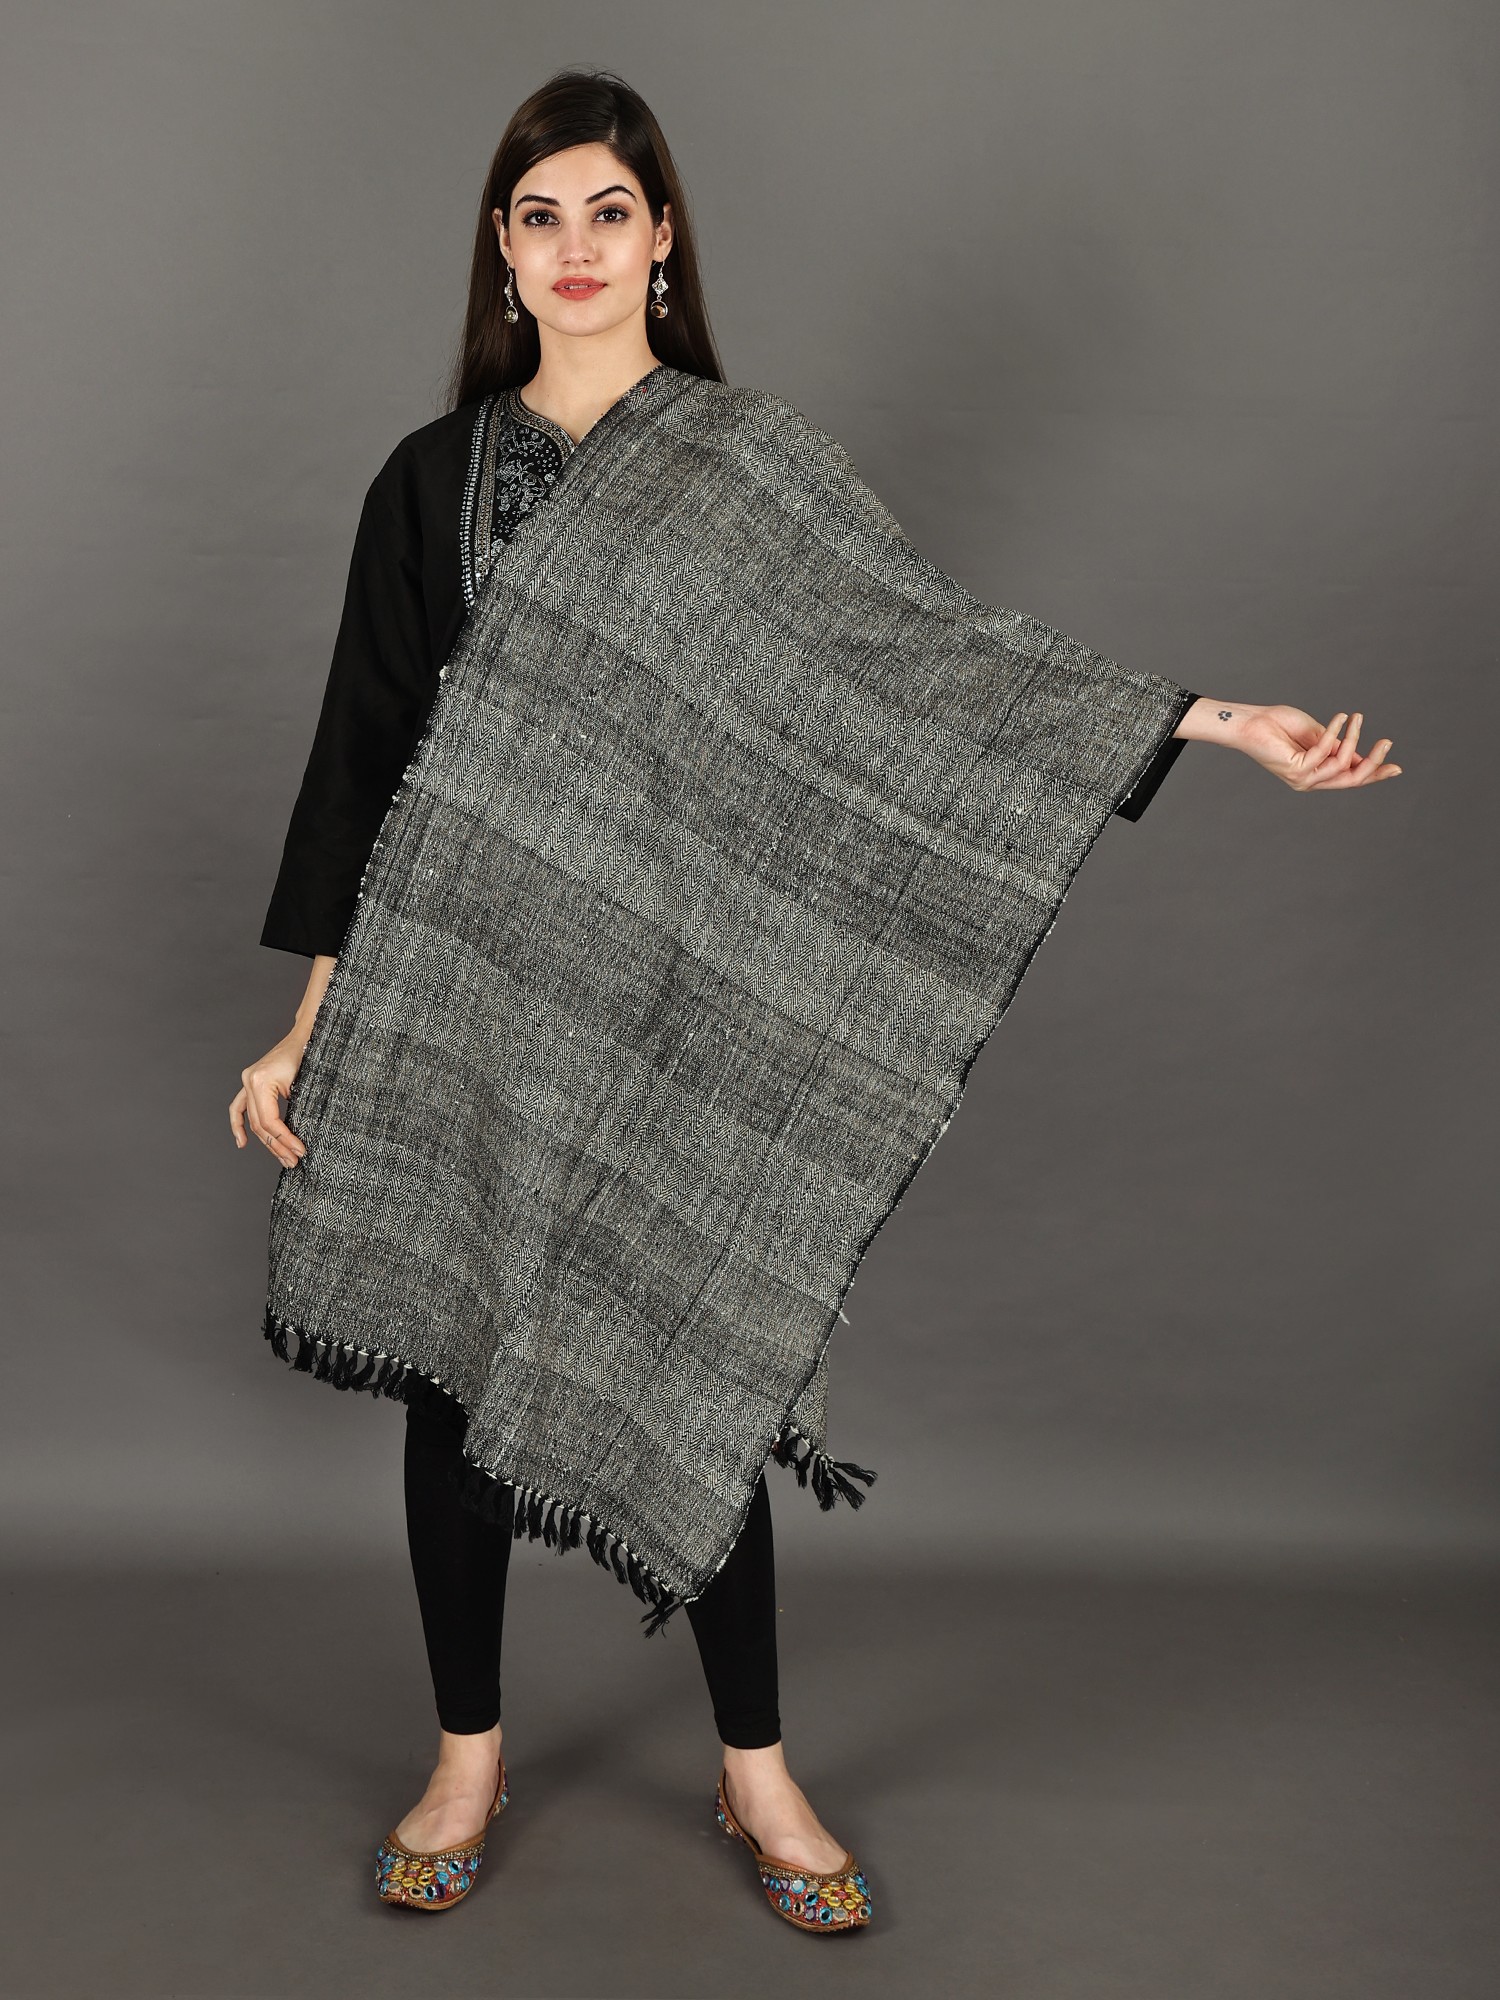 Black and Beige Handwoven Pure Wool Stole With Check Pattern From ...